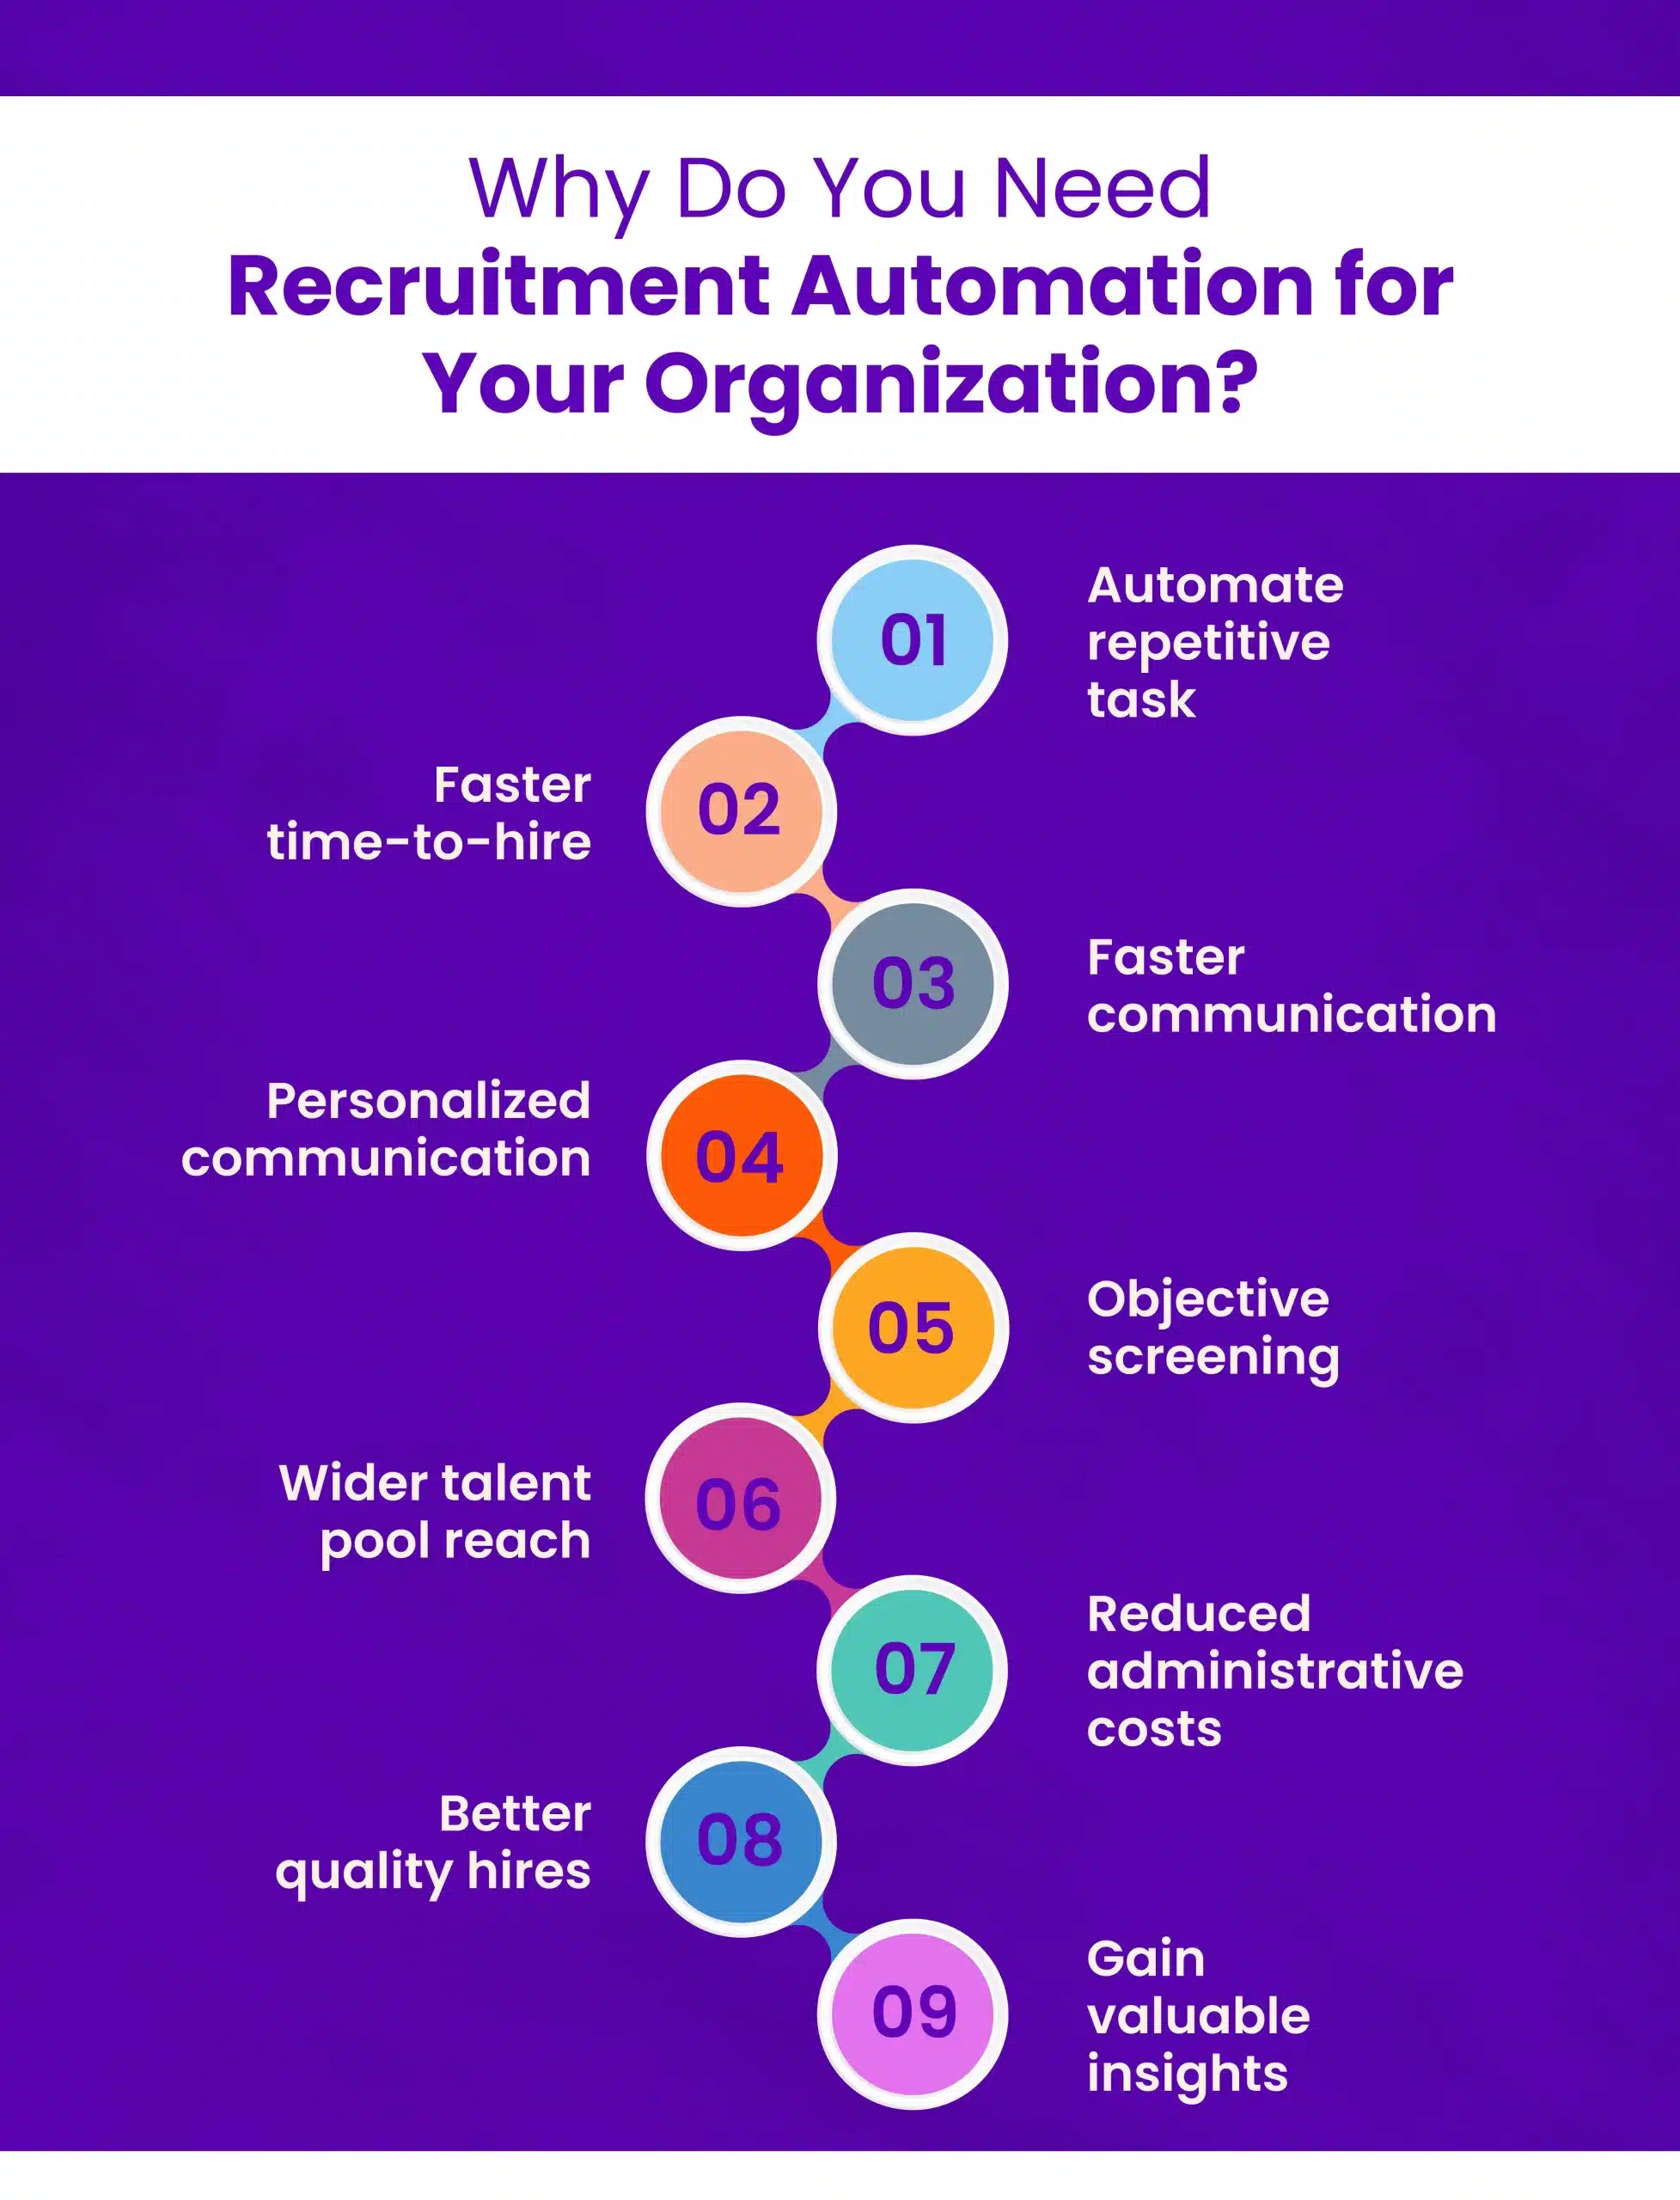 Why Do You Need Recruitment Automation